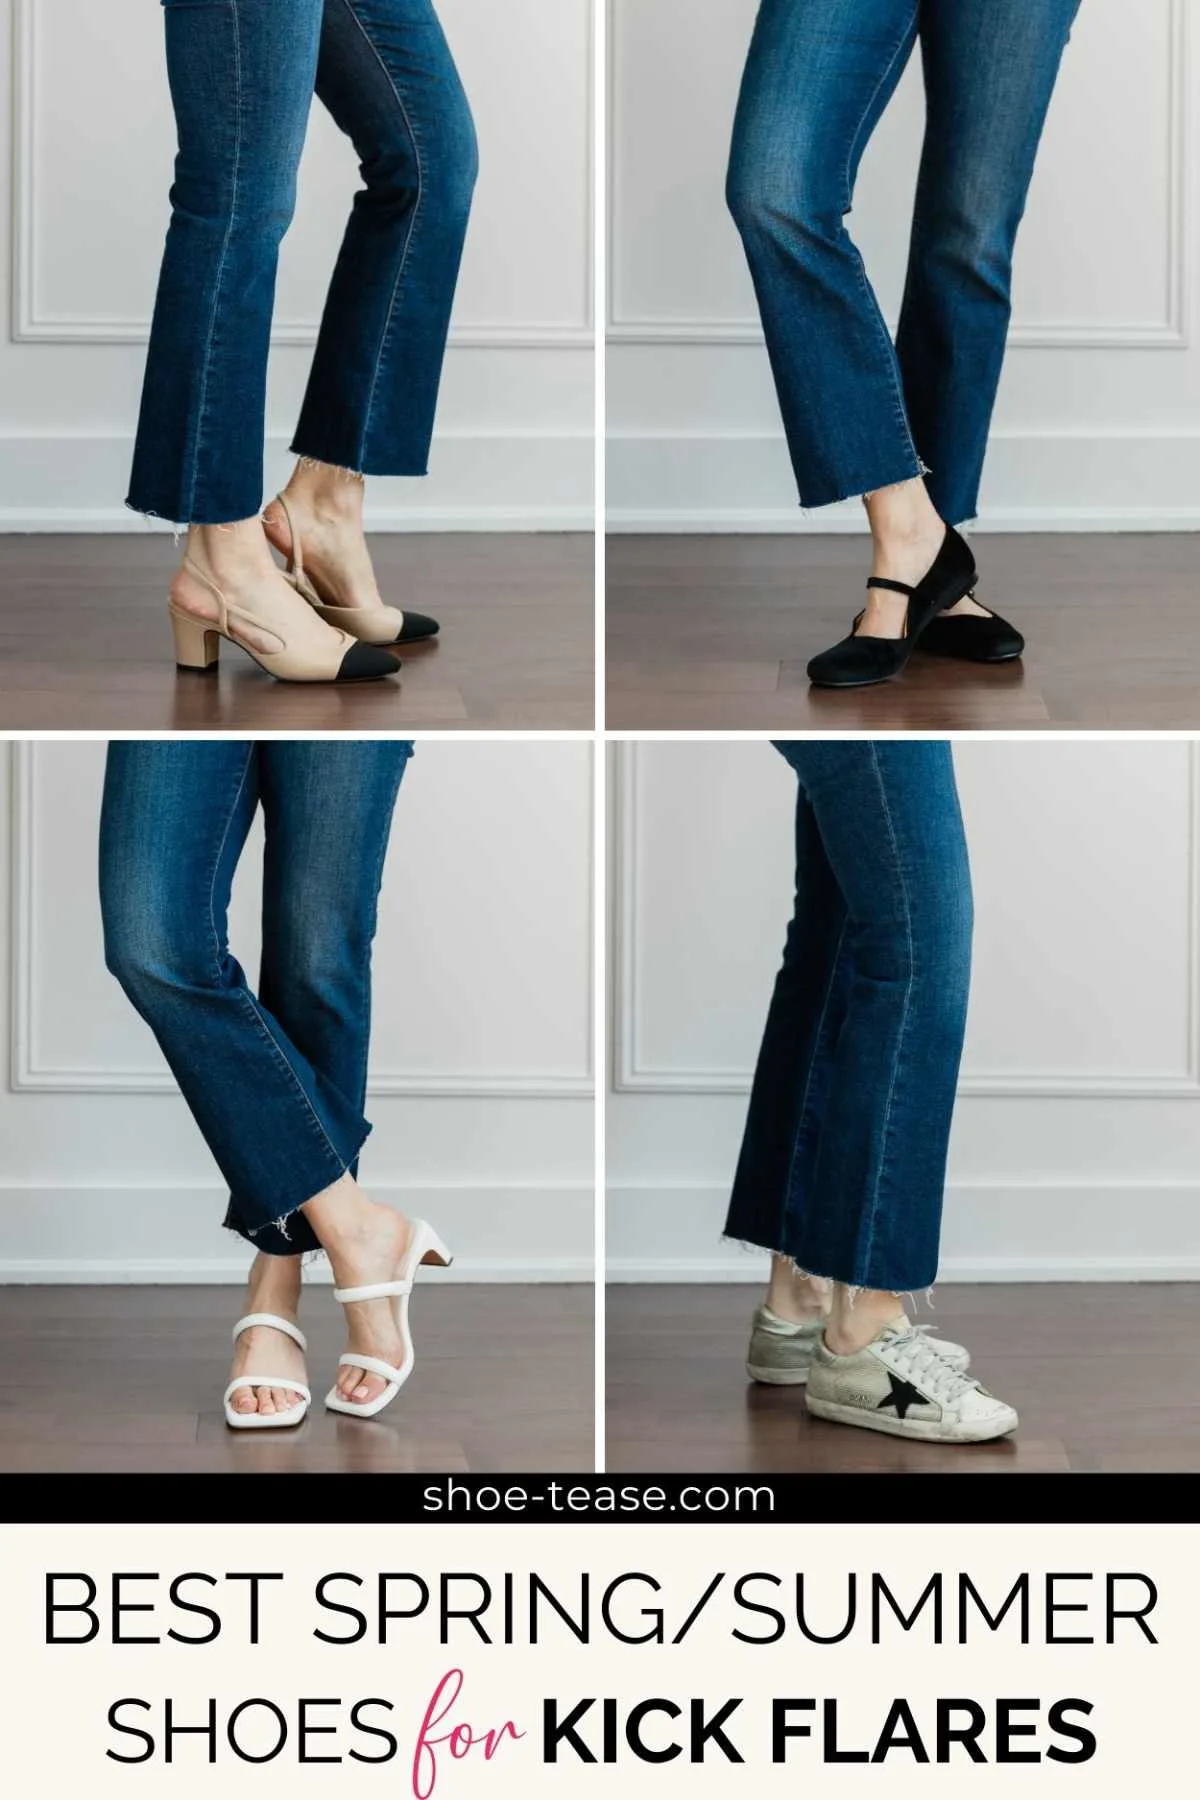 Collage of 4 cropped views of woman's legs wearing blue kick flare jeans with different spring summer shoes.